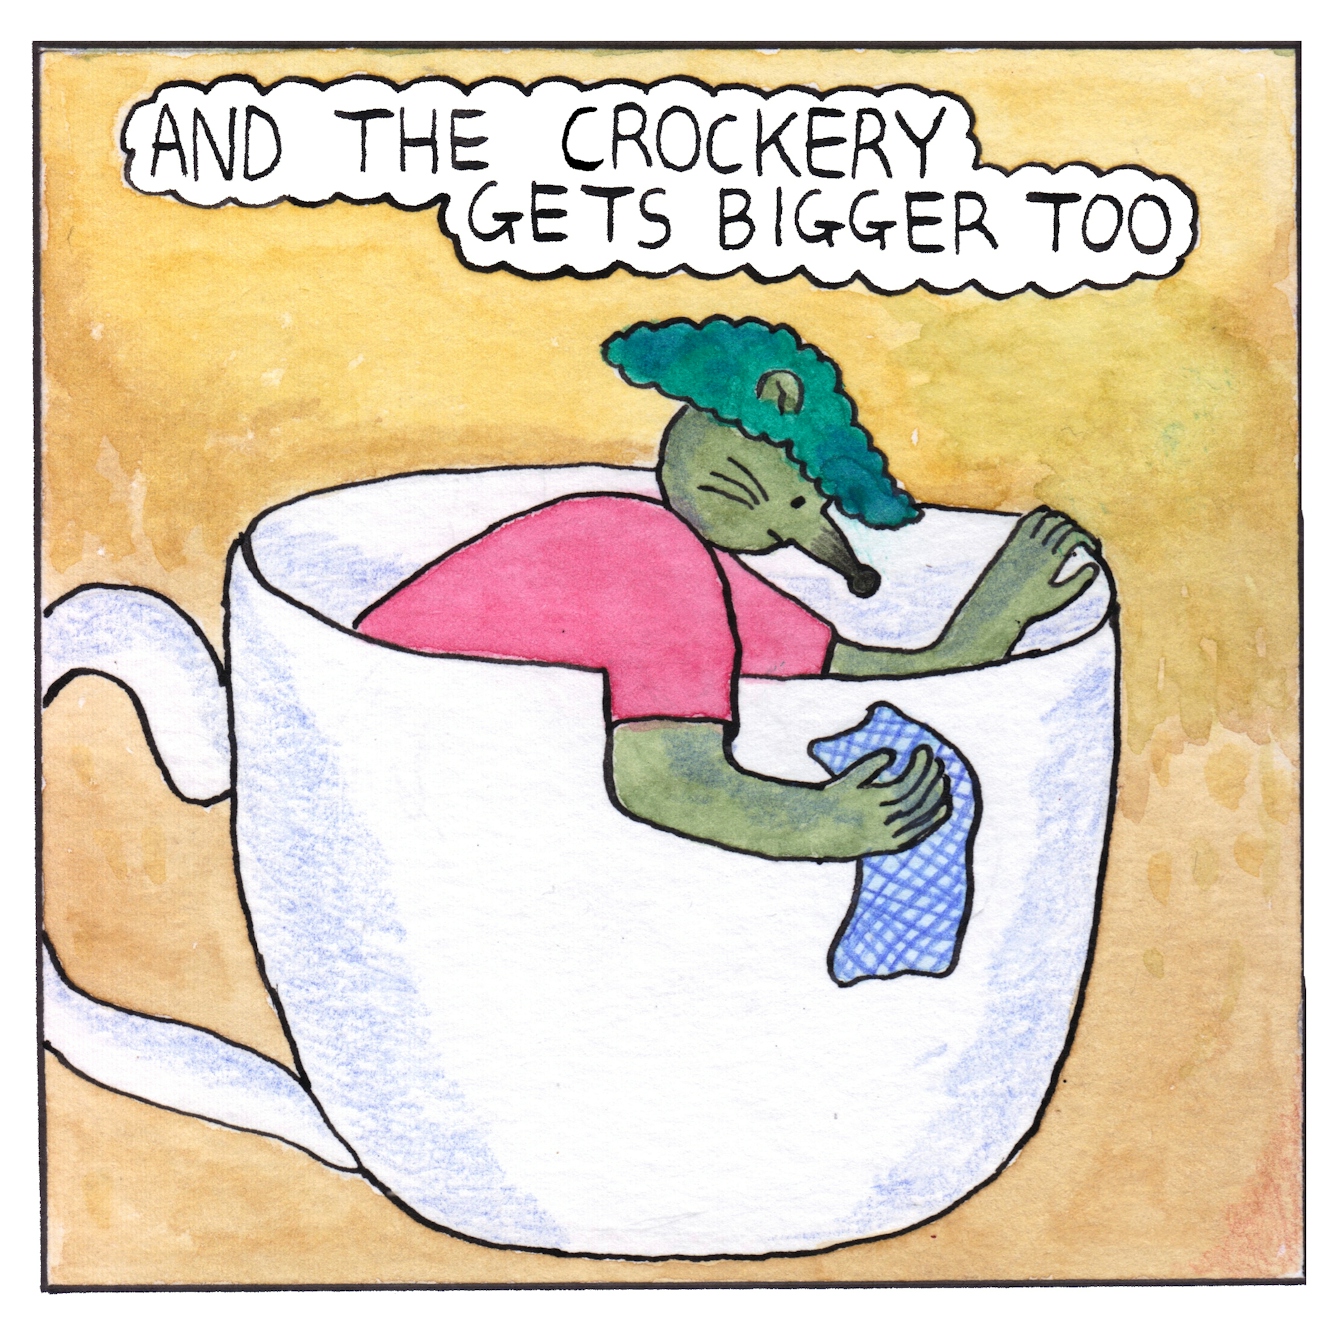 Panel 5 of a six-panel comic made with ink, watercolour and colour pencils: Most of the frame is filled with a huge white tea cup. The mouse crouches inside the cup, scrubbing the outside with a blue checked cloth in their right hand and holding the rim of the cup with the other hand. A text bubble above the cup reads: “And the crockery gets bigger too”